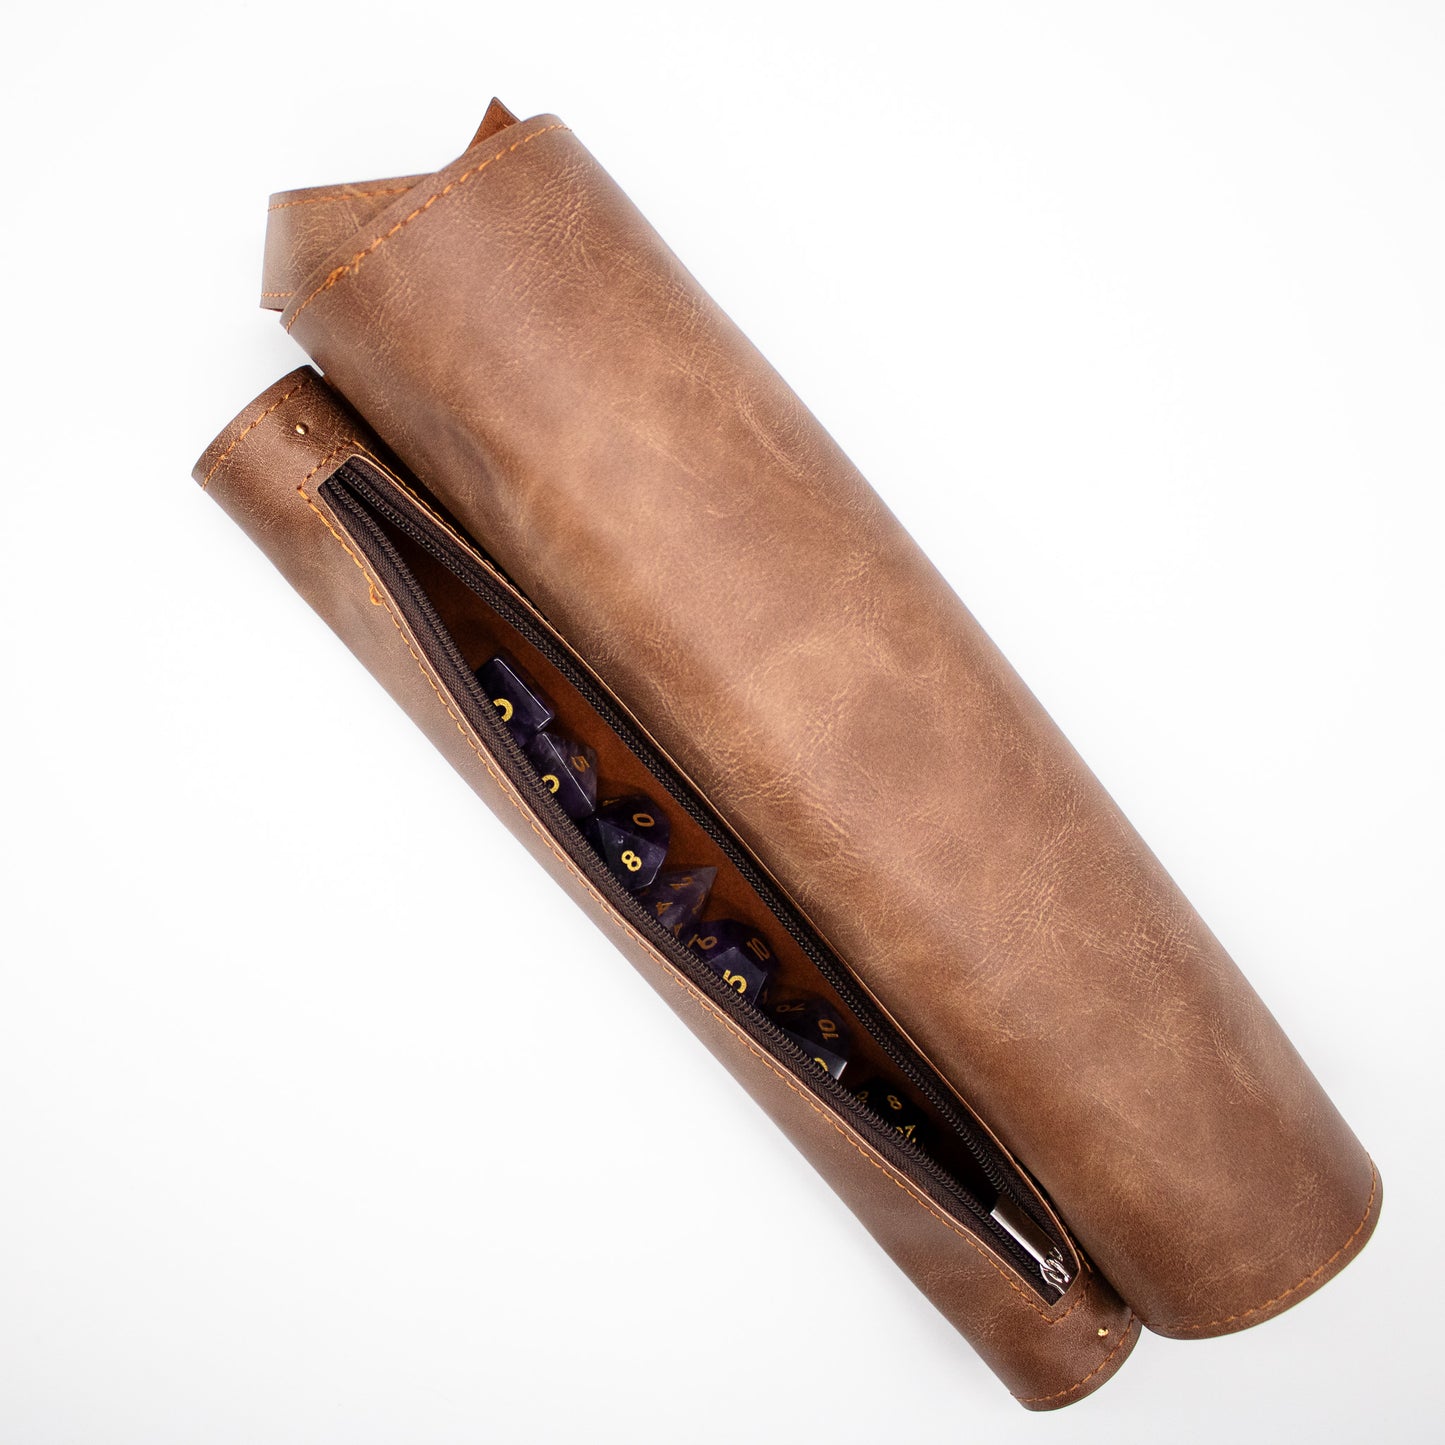 The Scroll - Faux Leather Rolling Mat